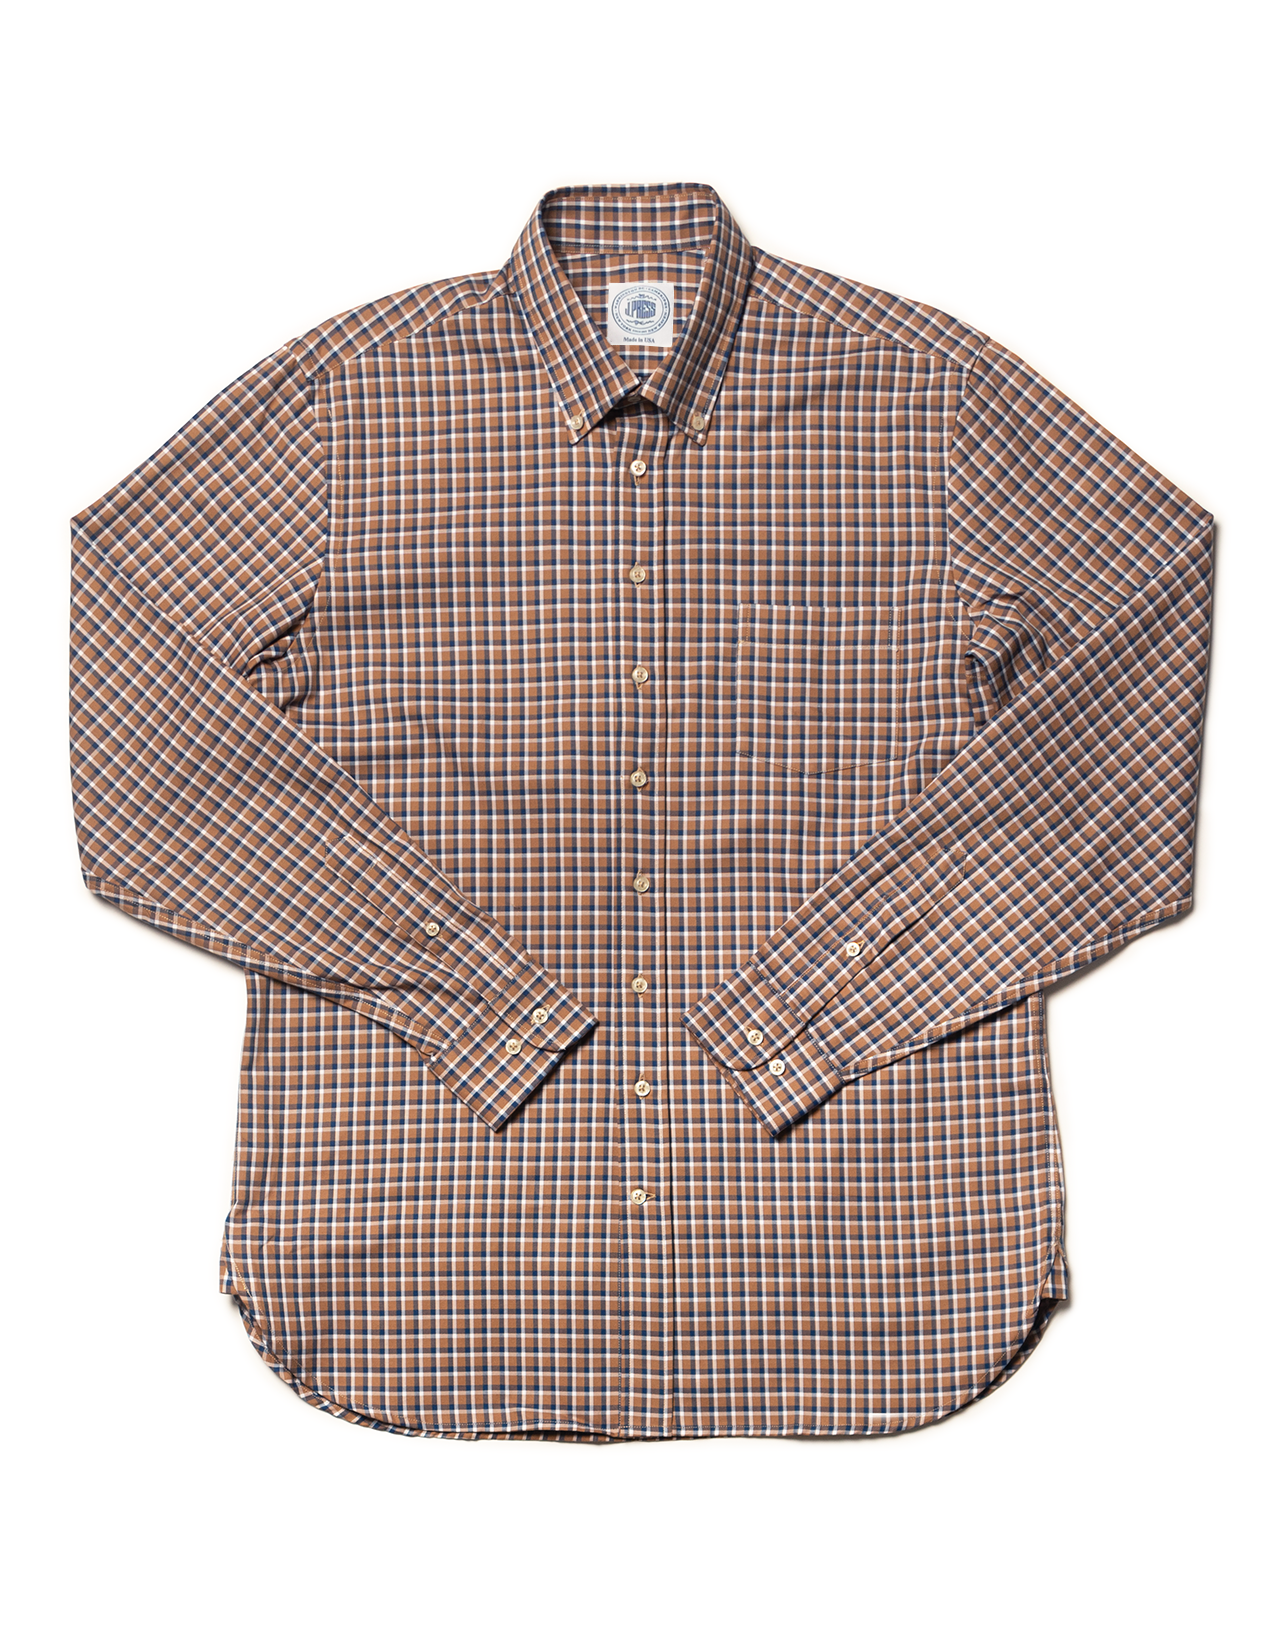 BROWN WITH NAVY/WHITE PANE COTTON/MODAL LONGSLEEVE SPORT SHIRT